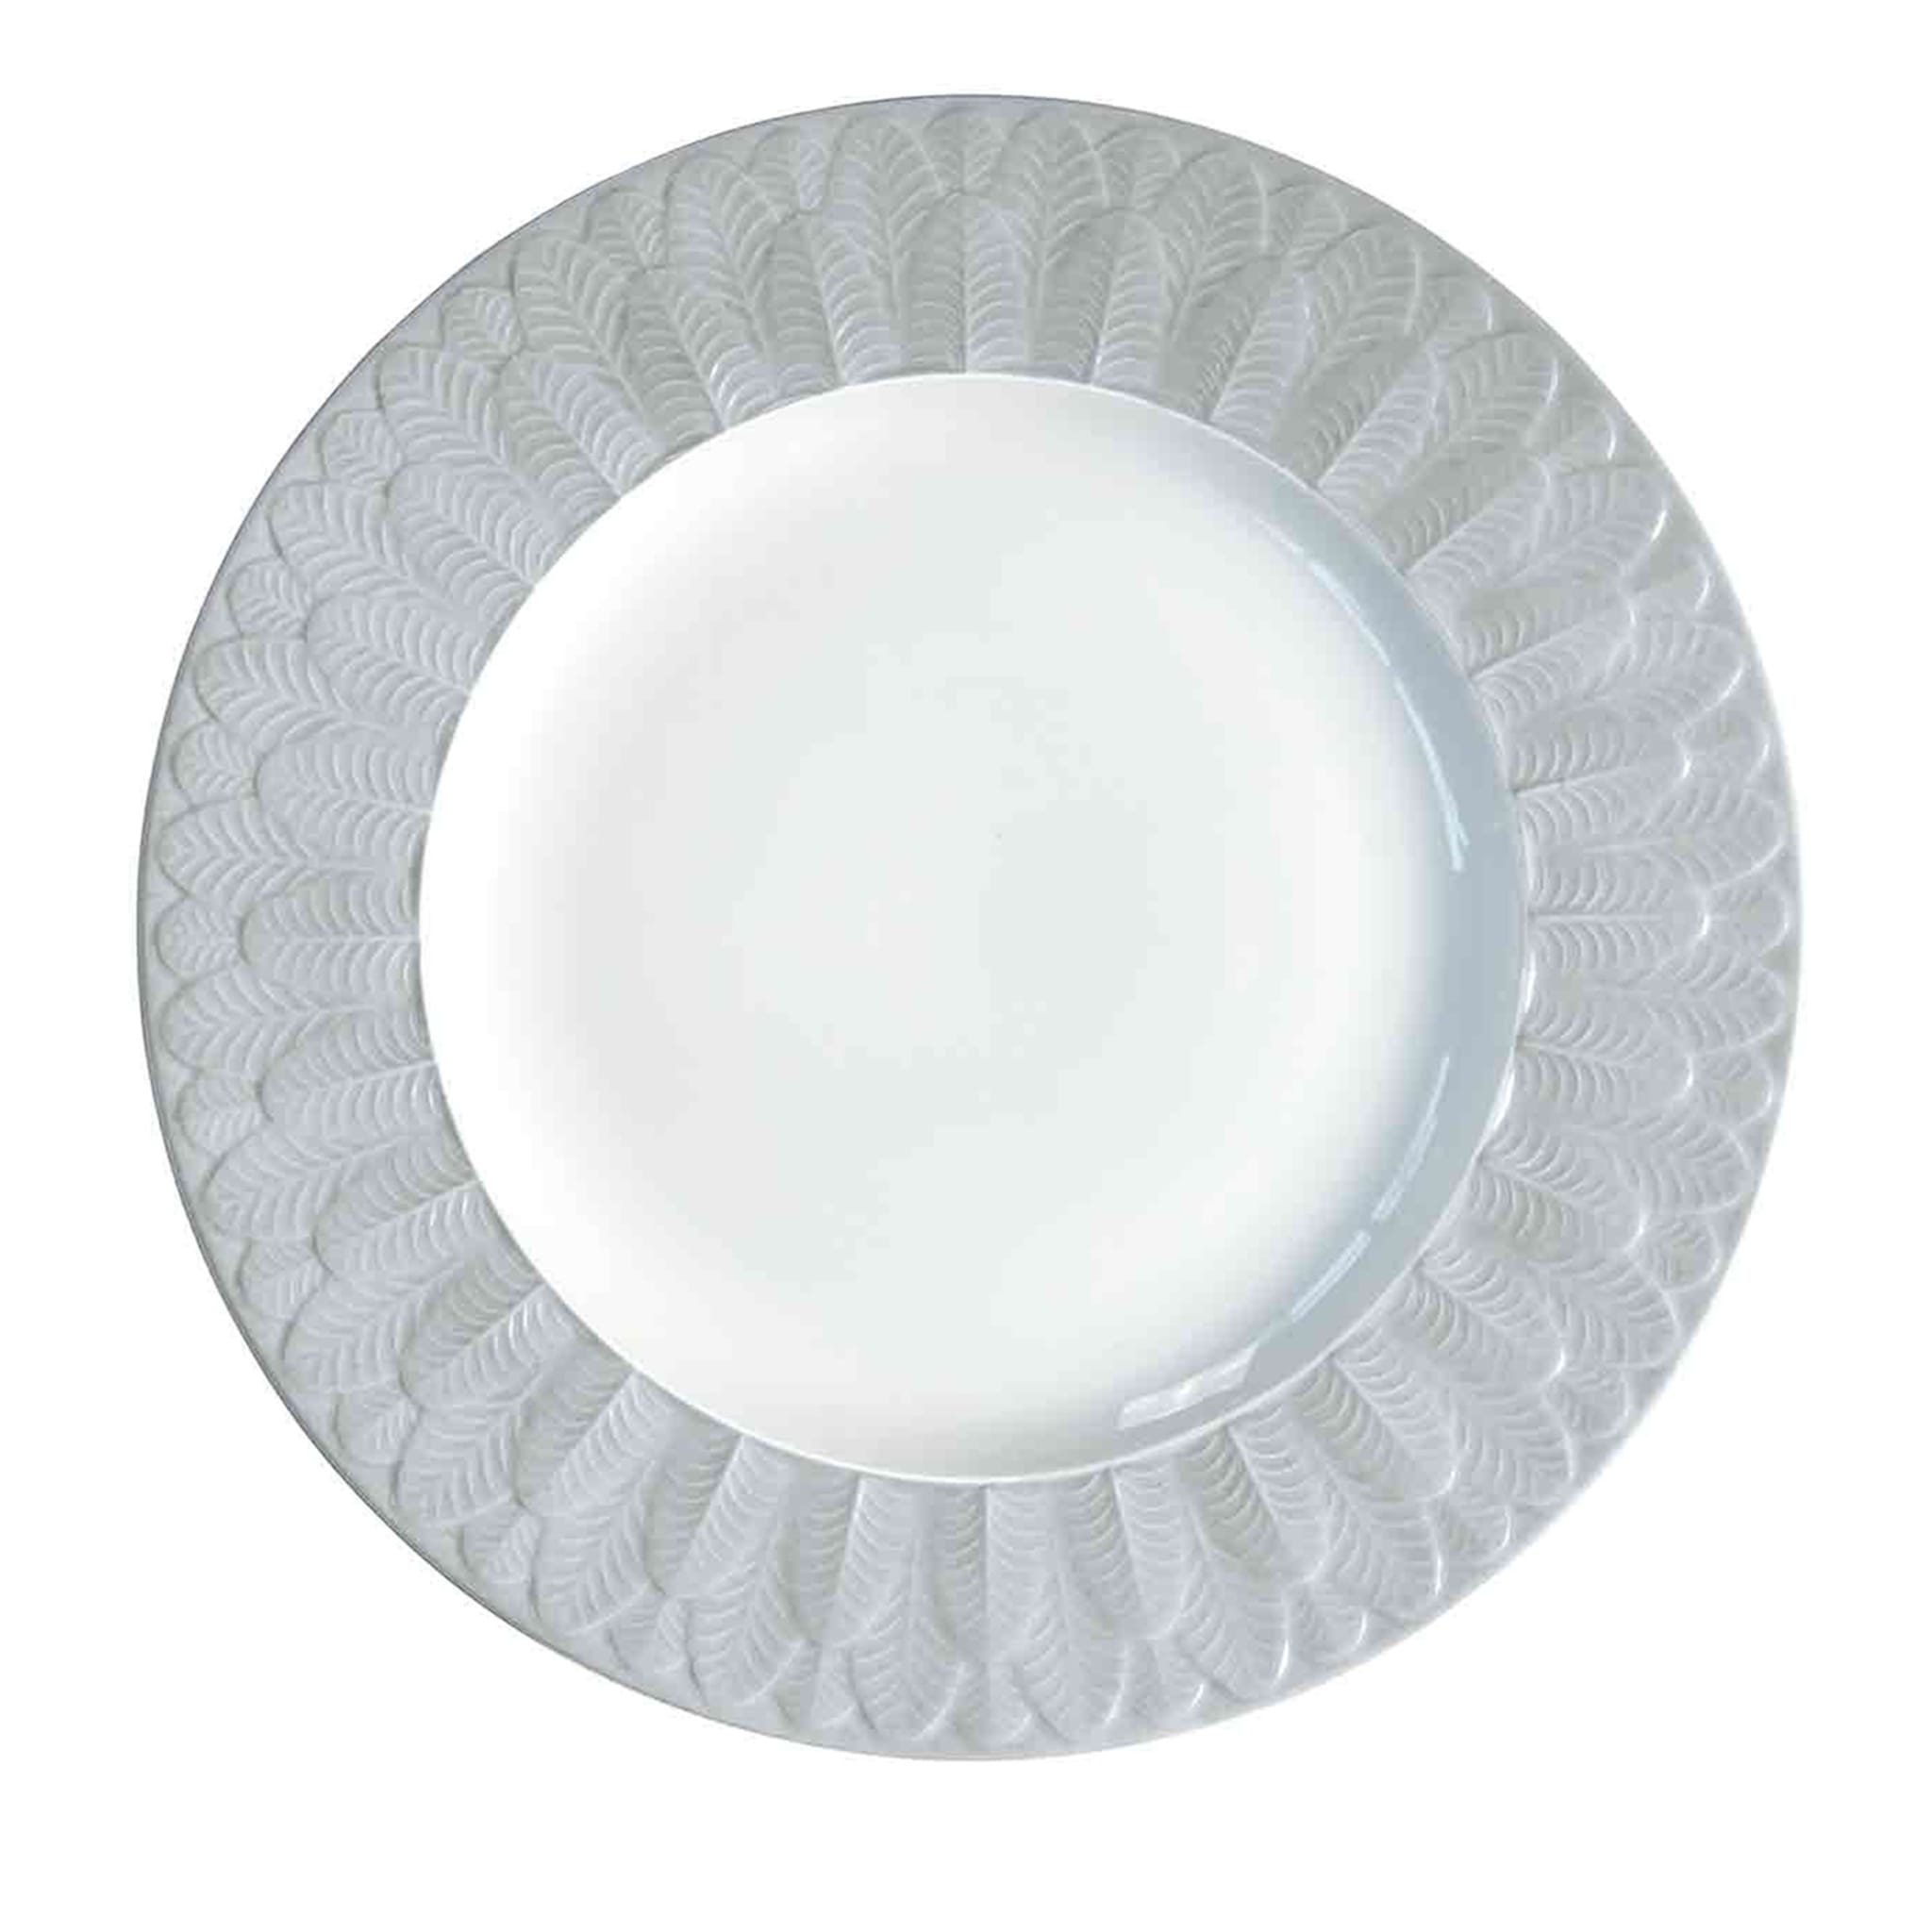 PEACOCK DINNER PLATE - GRAY - Main view